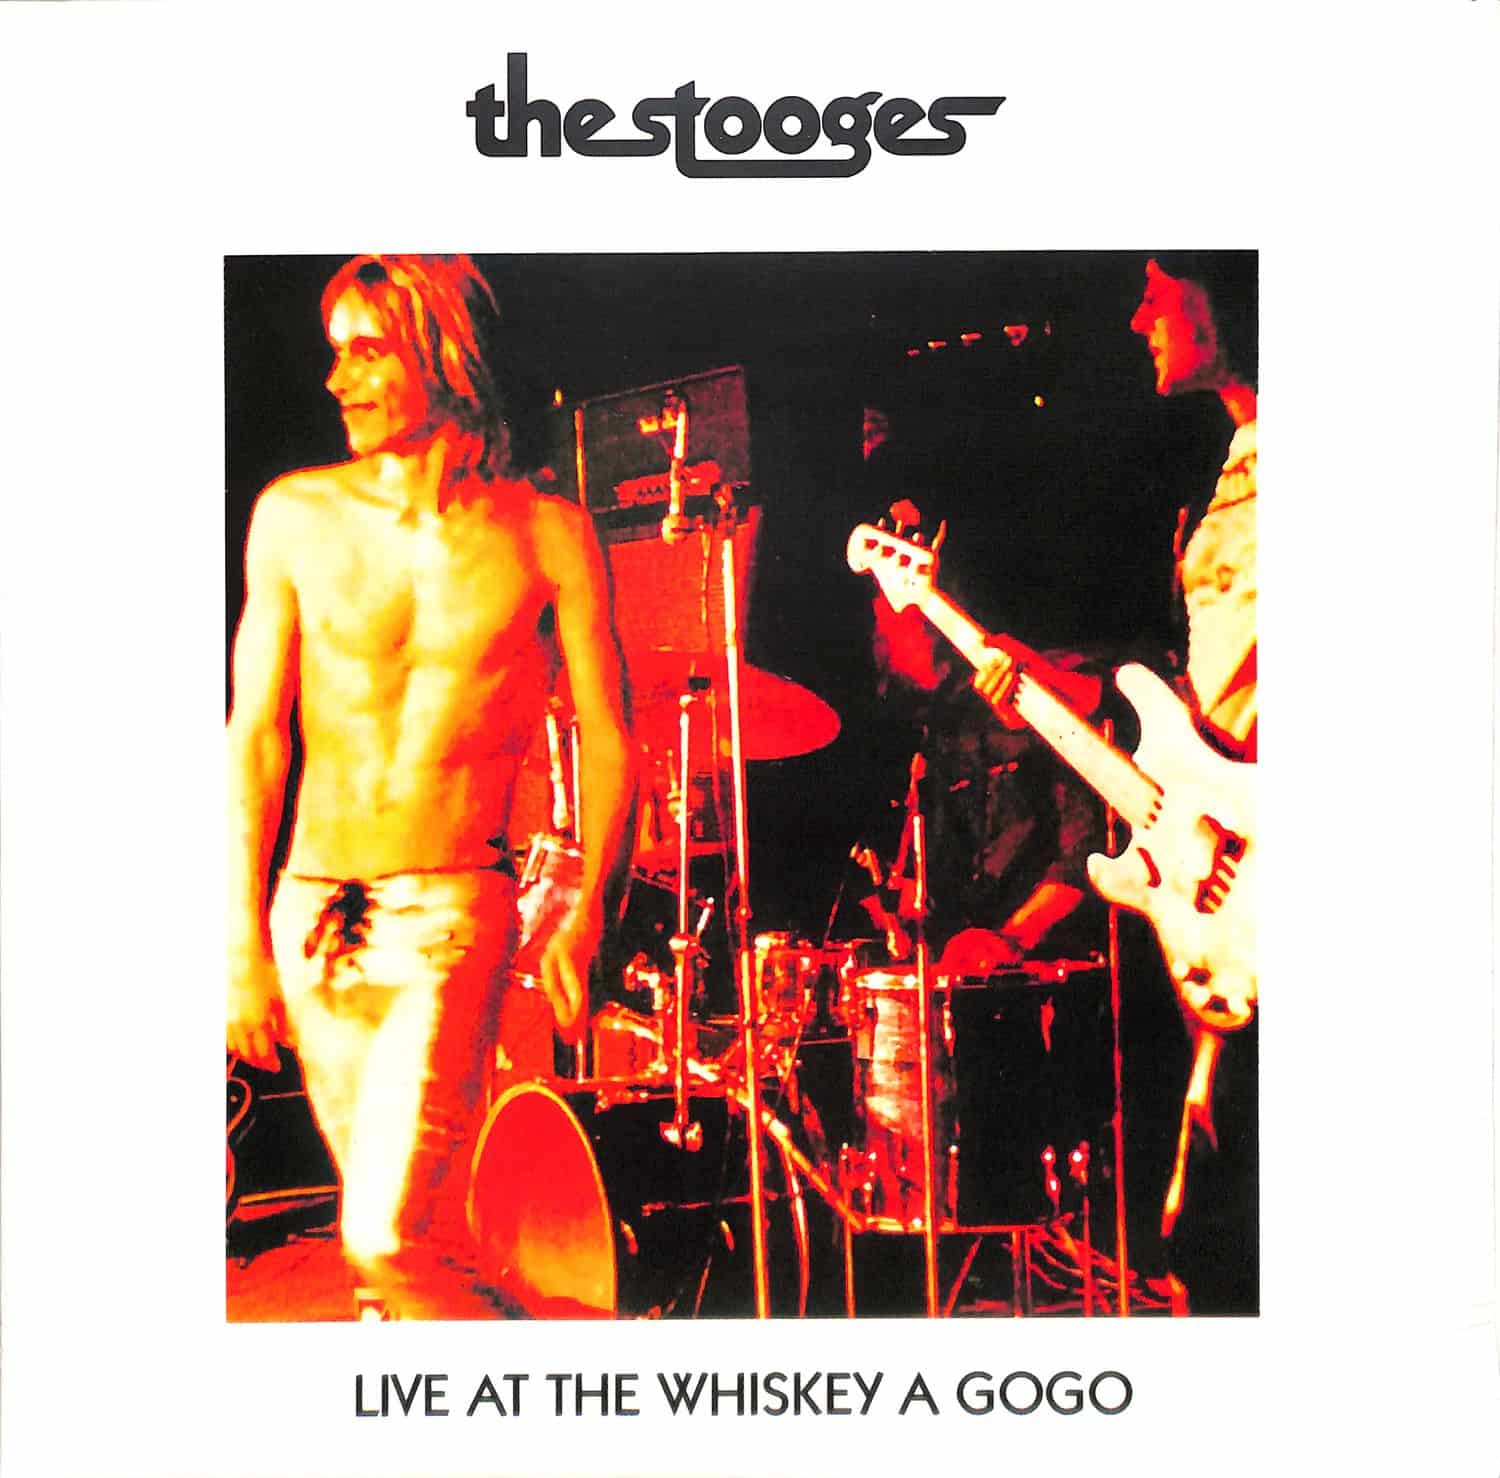 The Stooges - LIVE AT THE WHISKEY A GOGO 